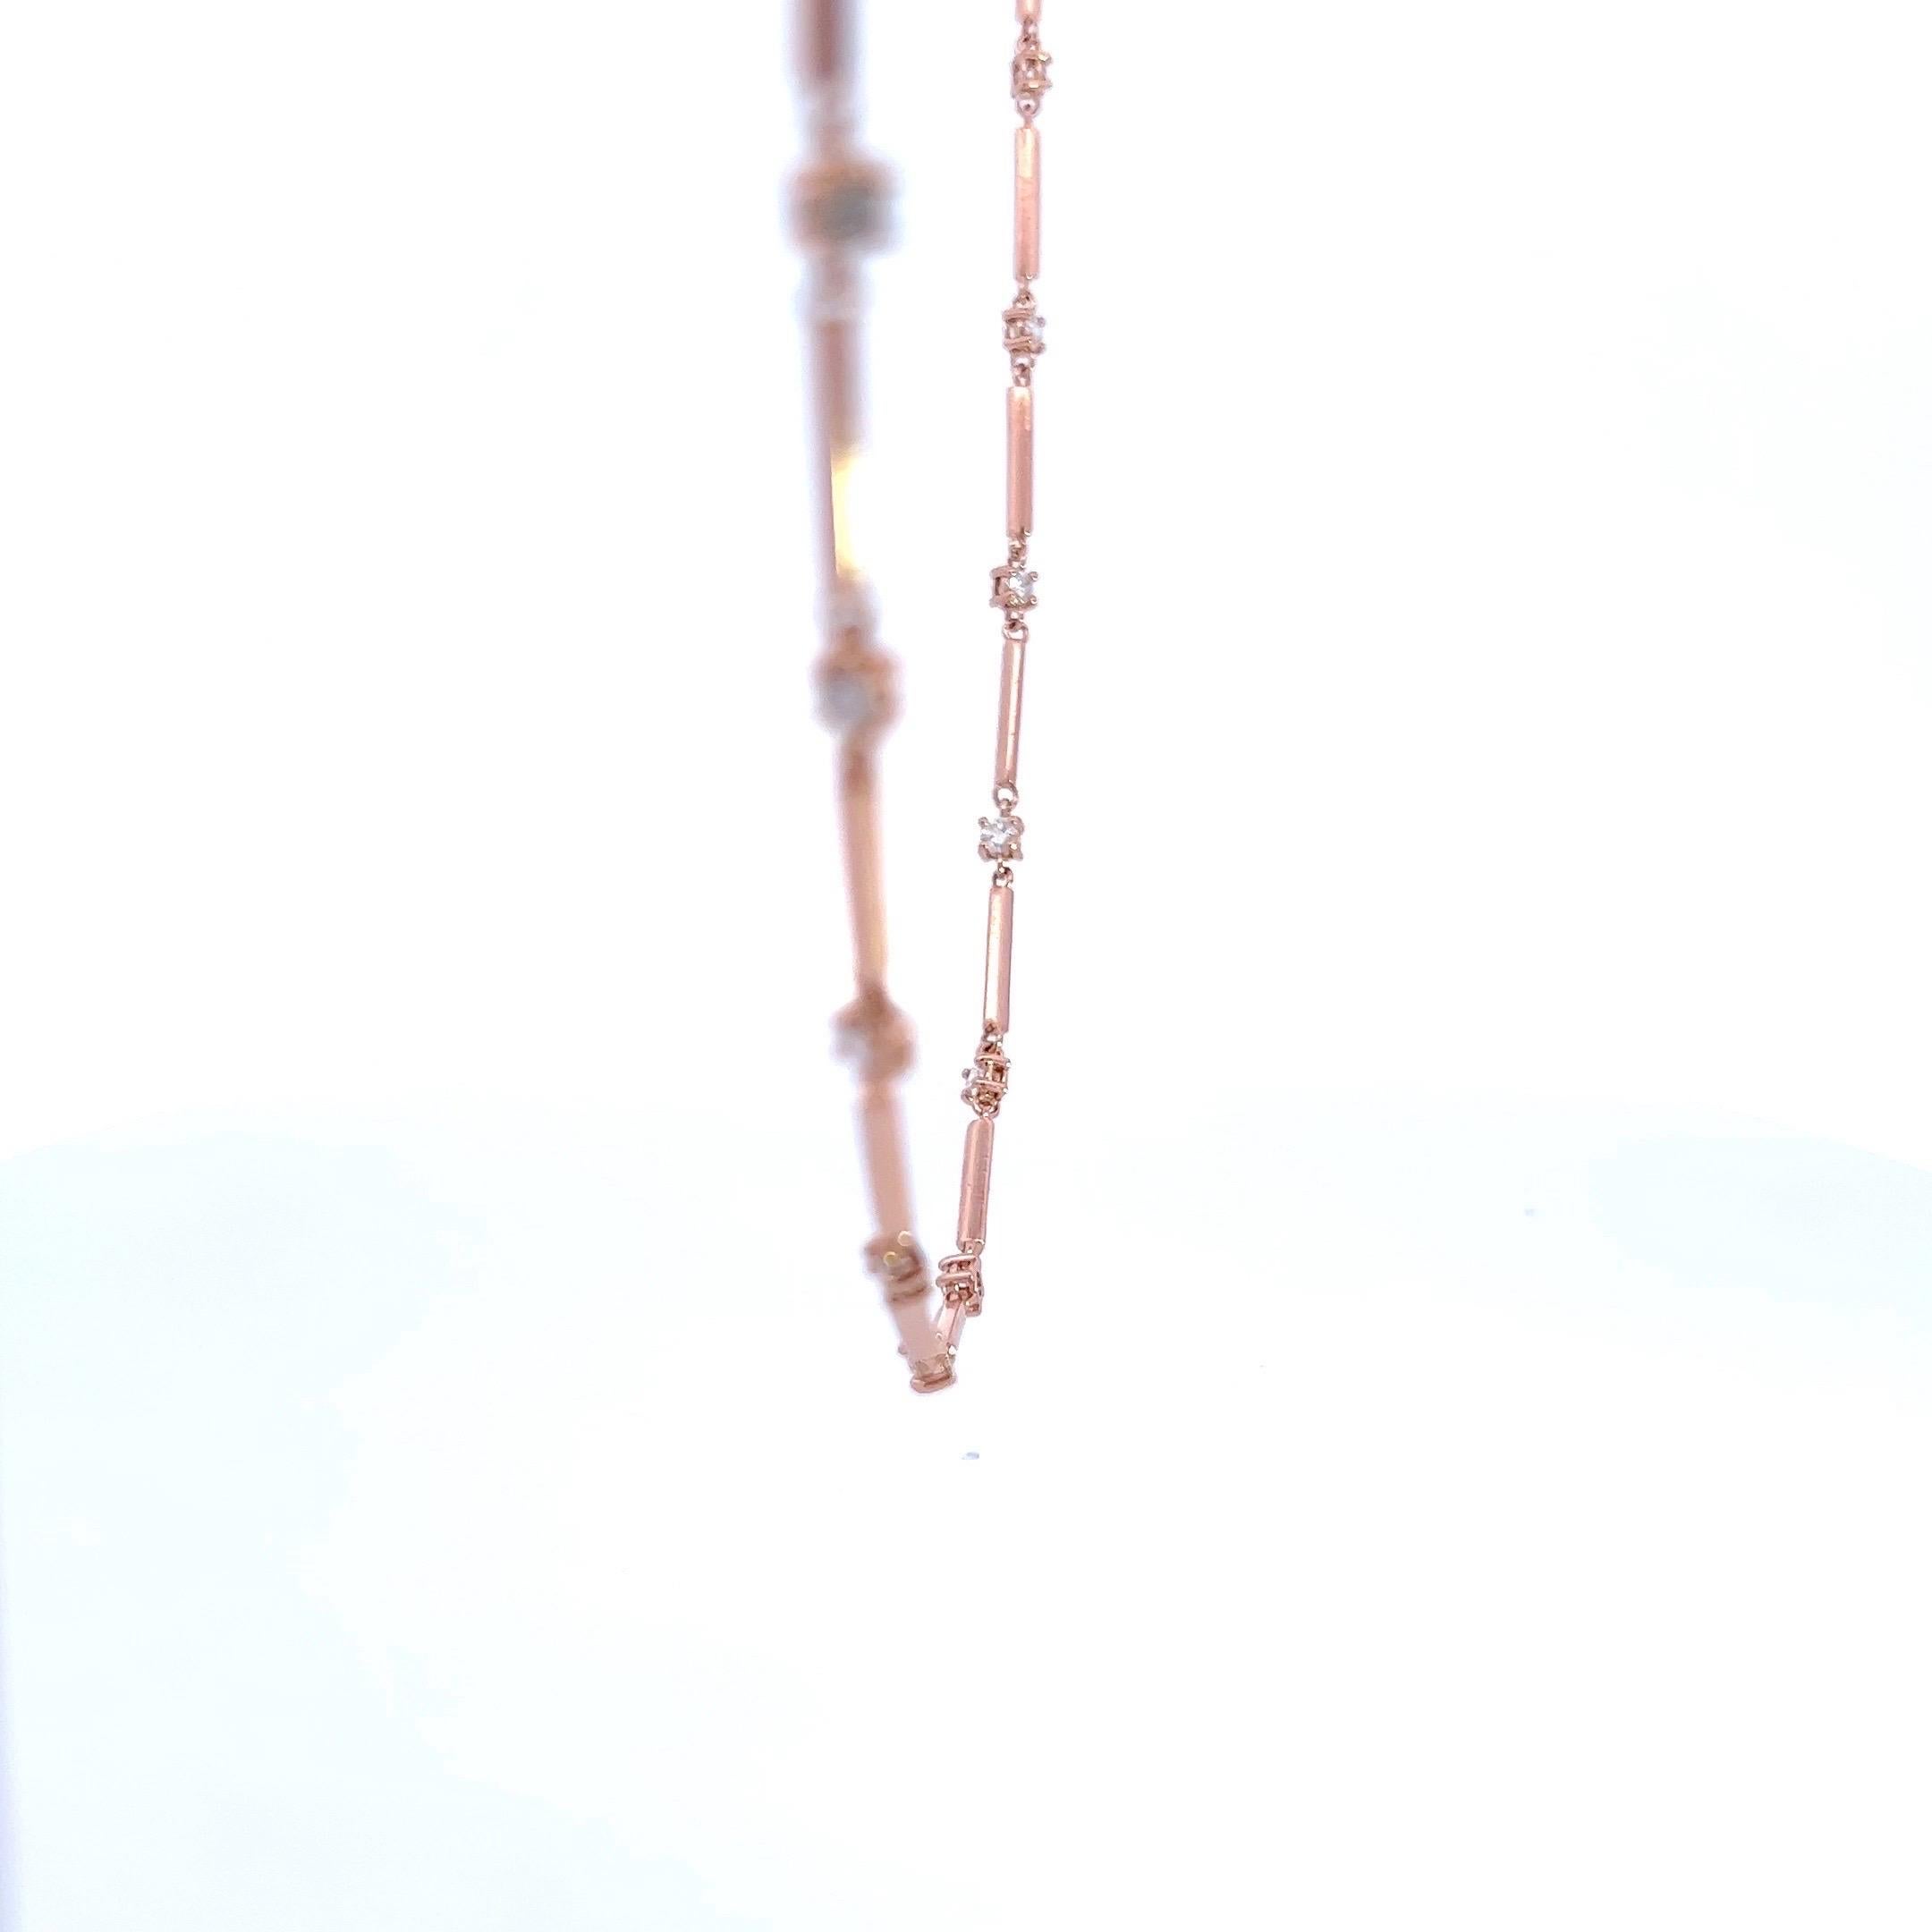 14k Rose Gold Diamonds Necklace with 2.01 Natural Diamonds in a Gold-Bar Chain For Sale 3